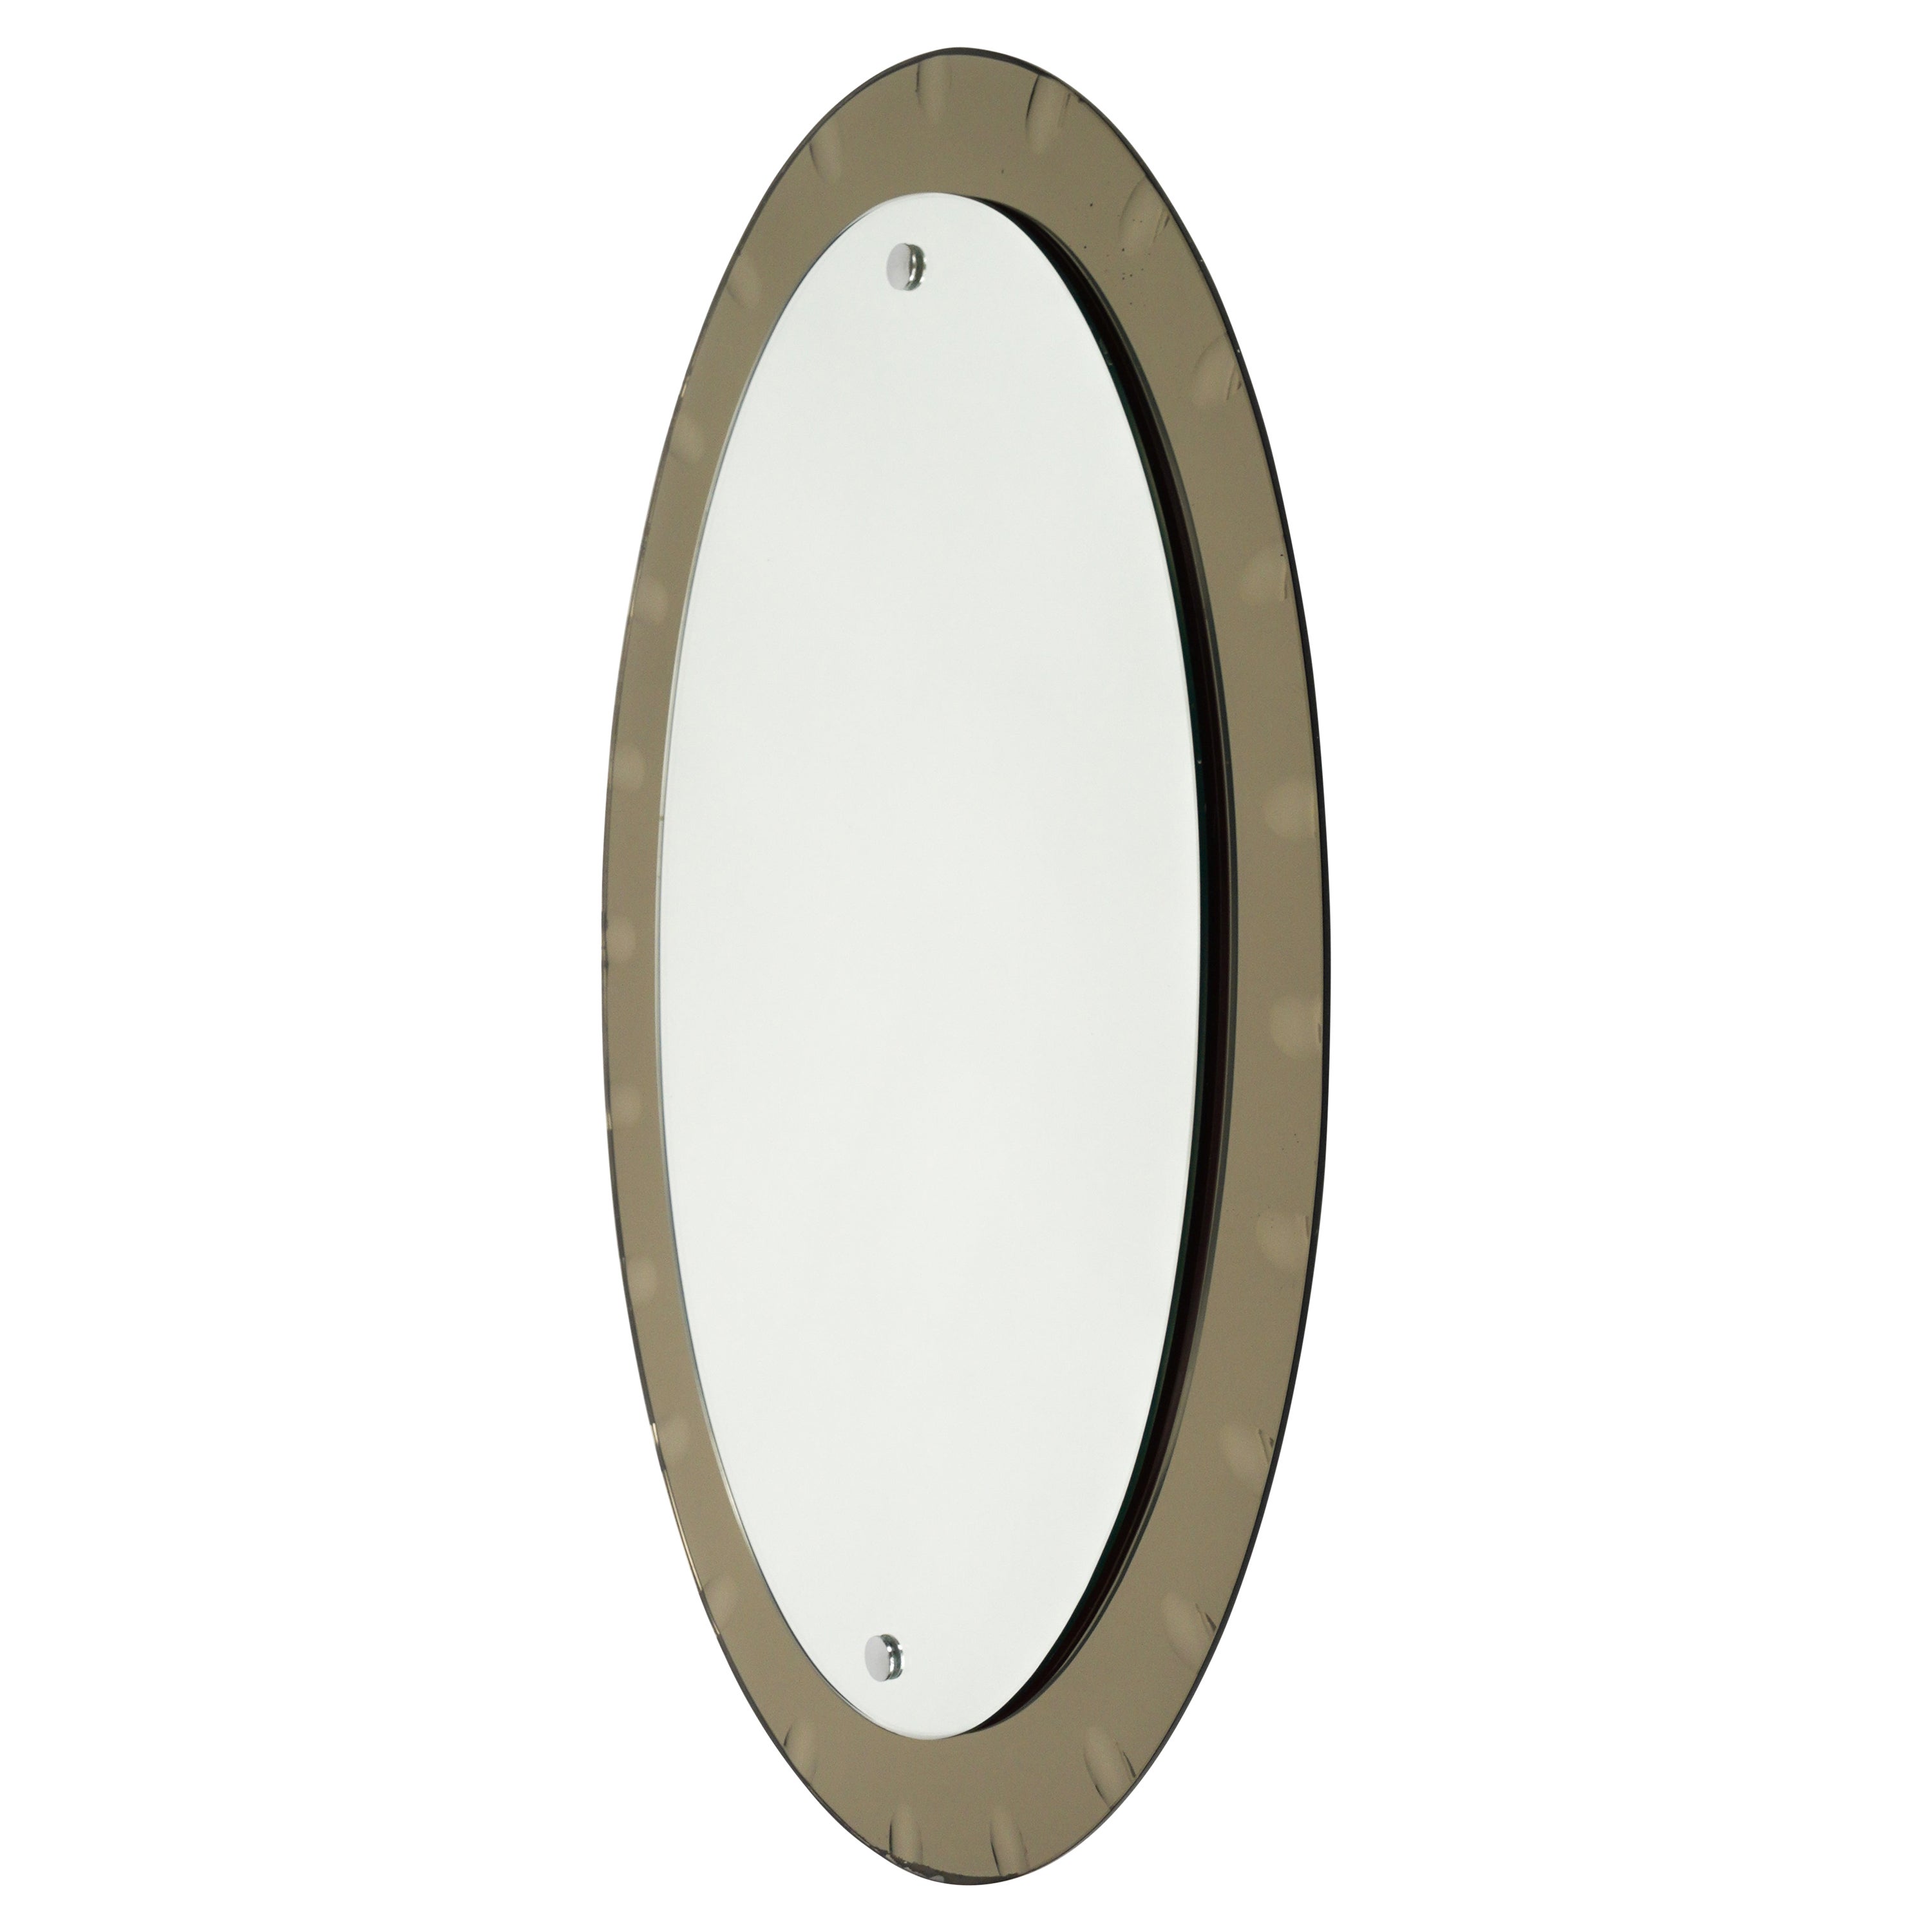 Midcentury Oval Wall Mirror with Bronzed Frame by Cristal Arte, Italy 1960s